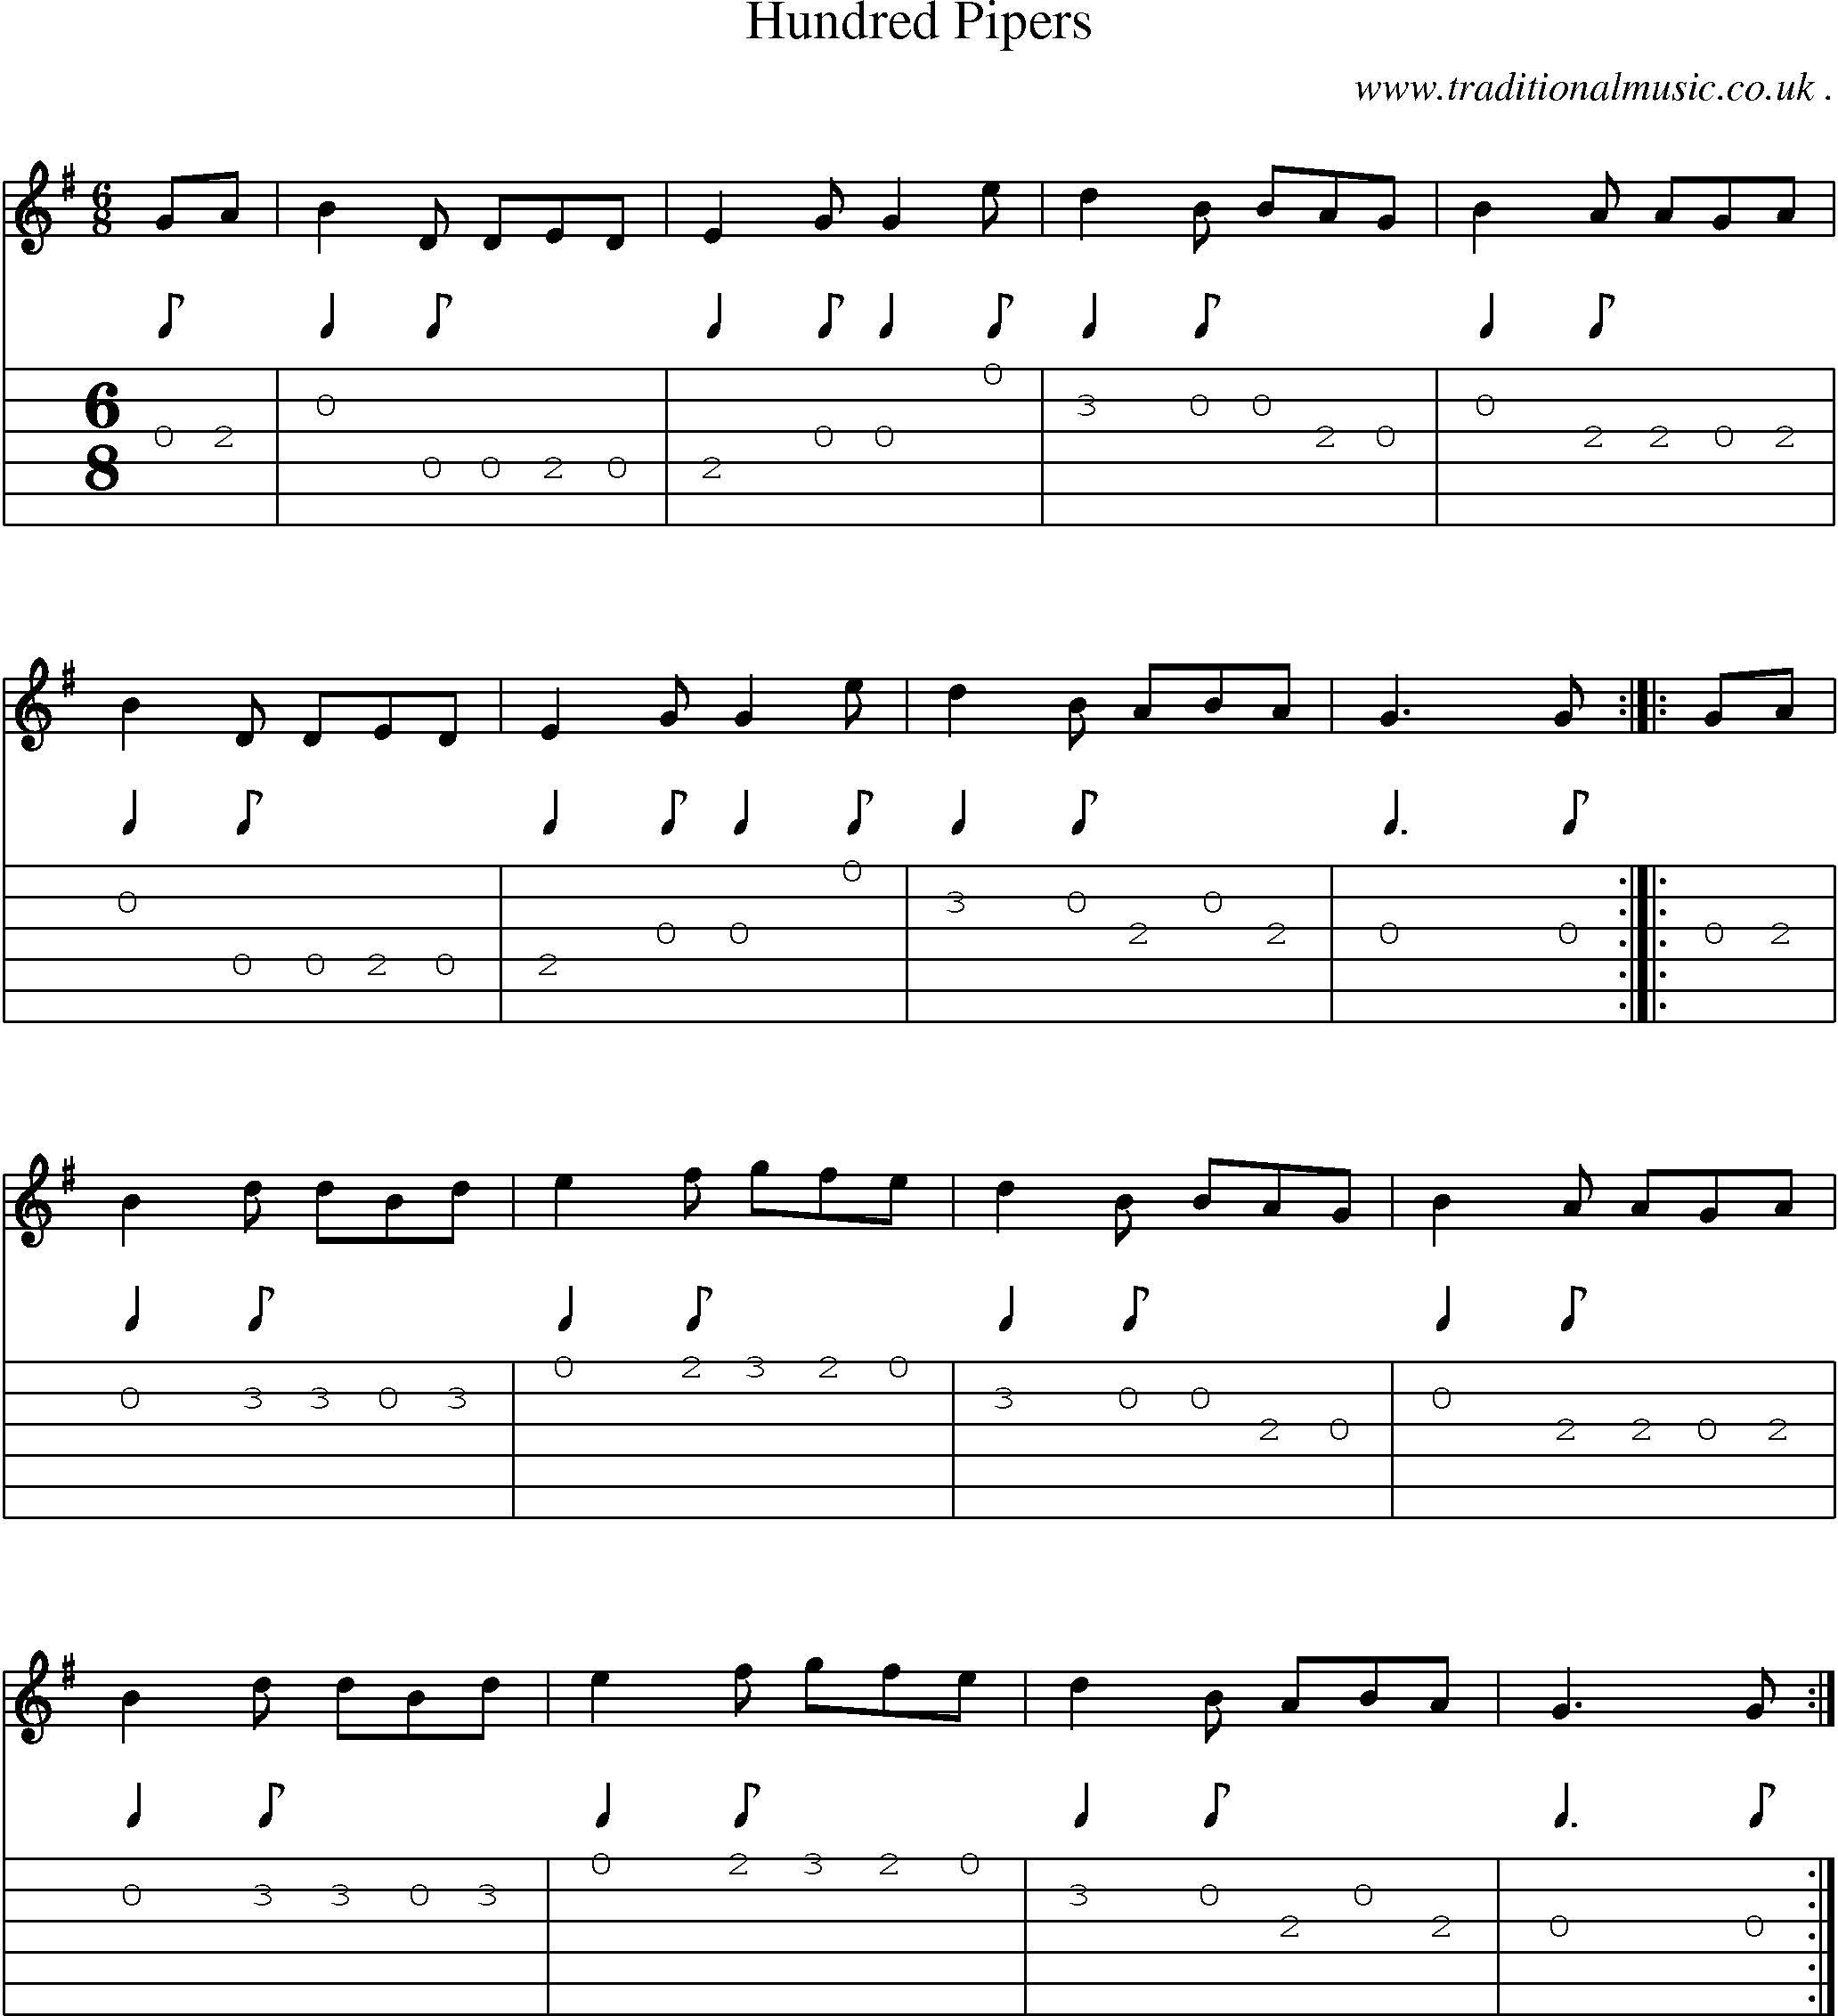 Sheet-Music and Guitar Tabs for Hundred Pipers